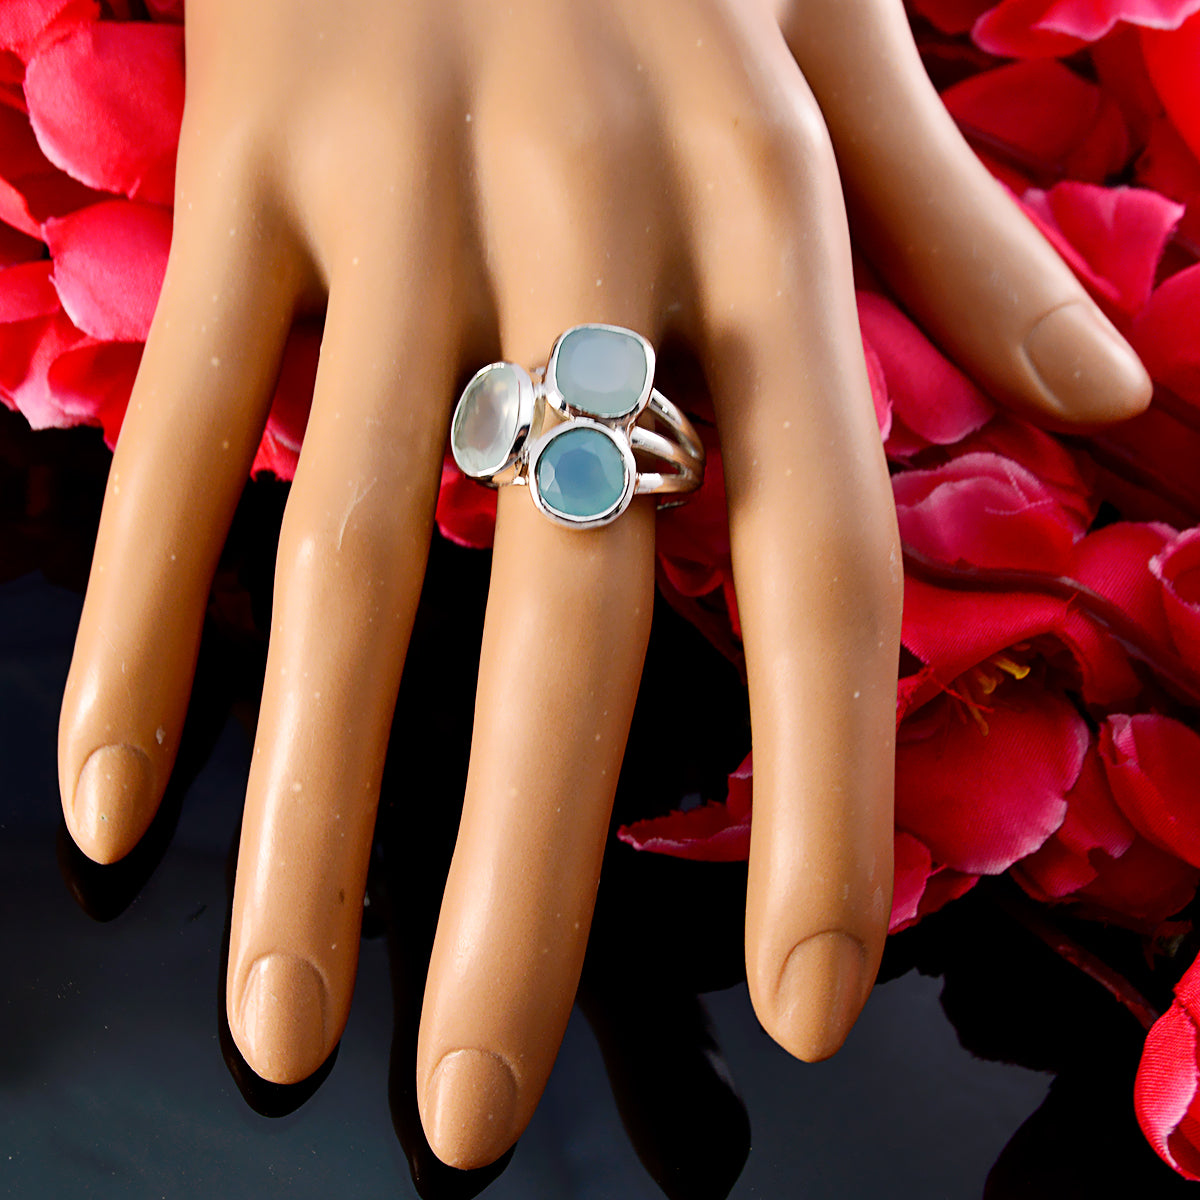 Presentable Gems Aqua Chalcedony Sterling Silver Ring Great Seller